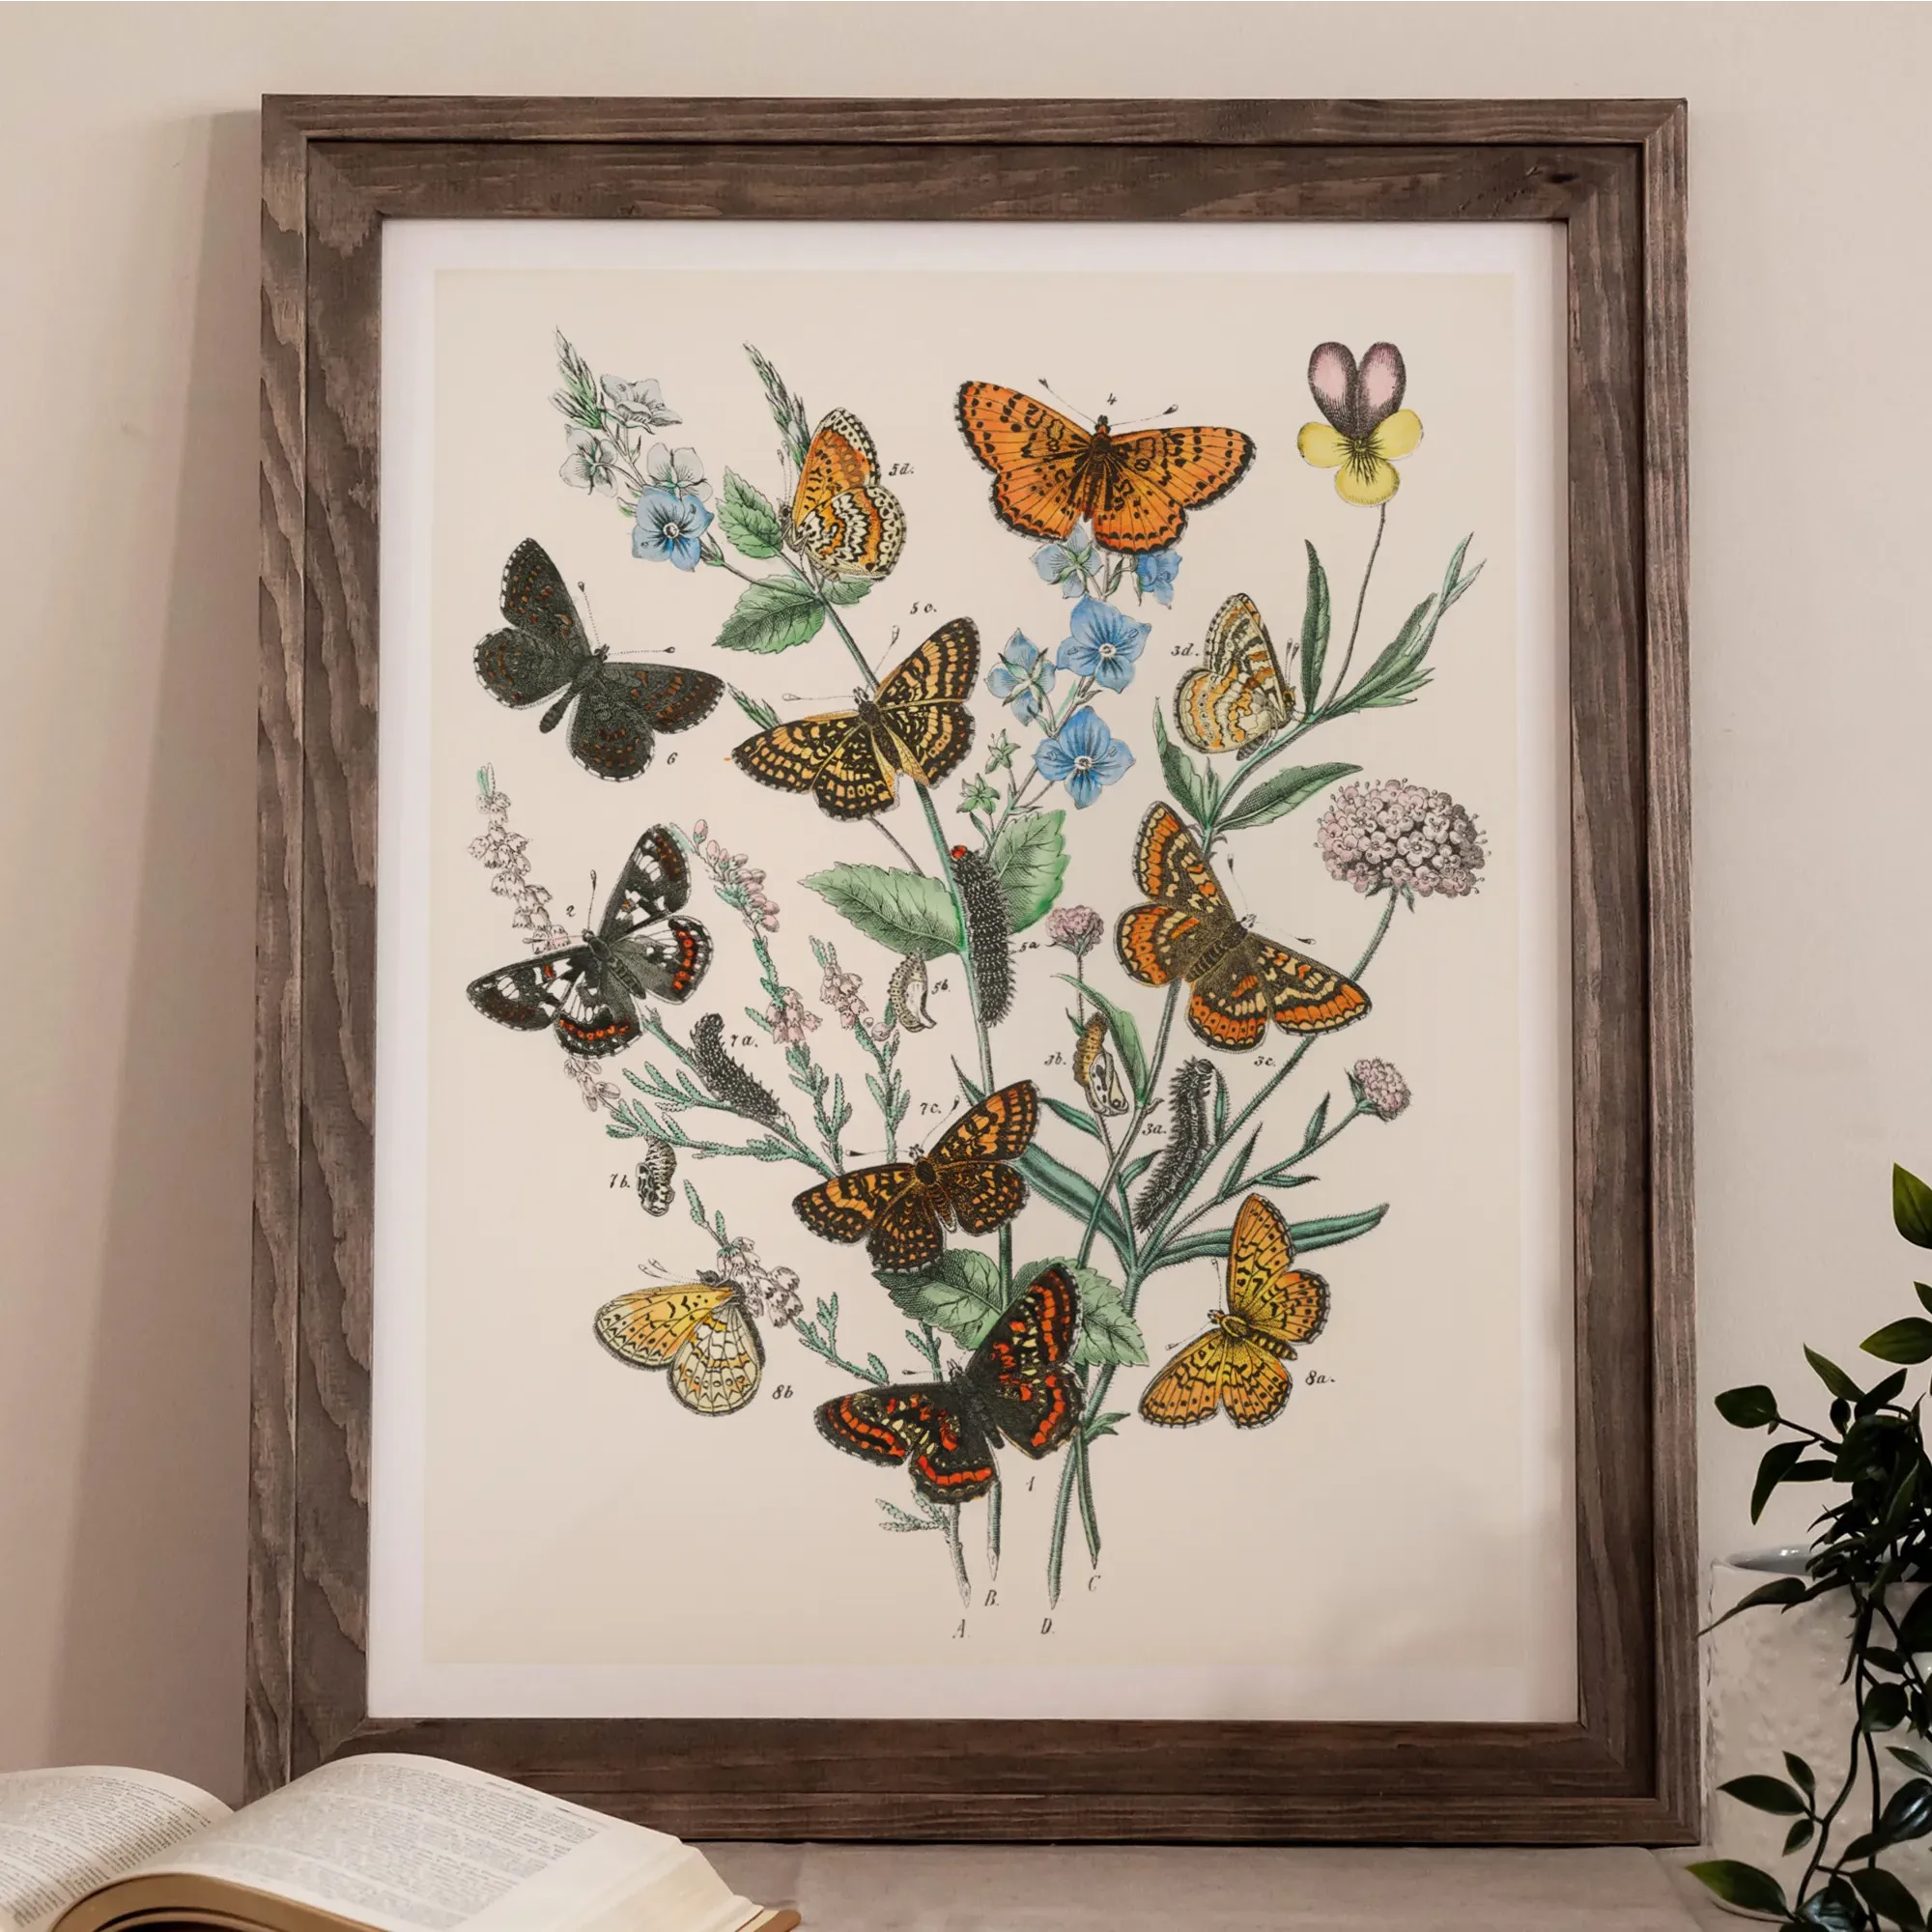 European Butterflies And Moths 2 By William Forsell Kirby Fine Art Print - 16’x20’ - Posters Prints & Visual